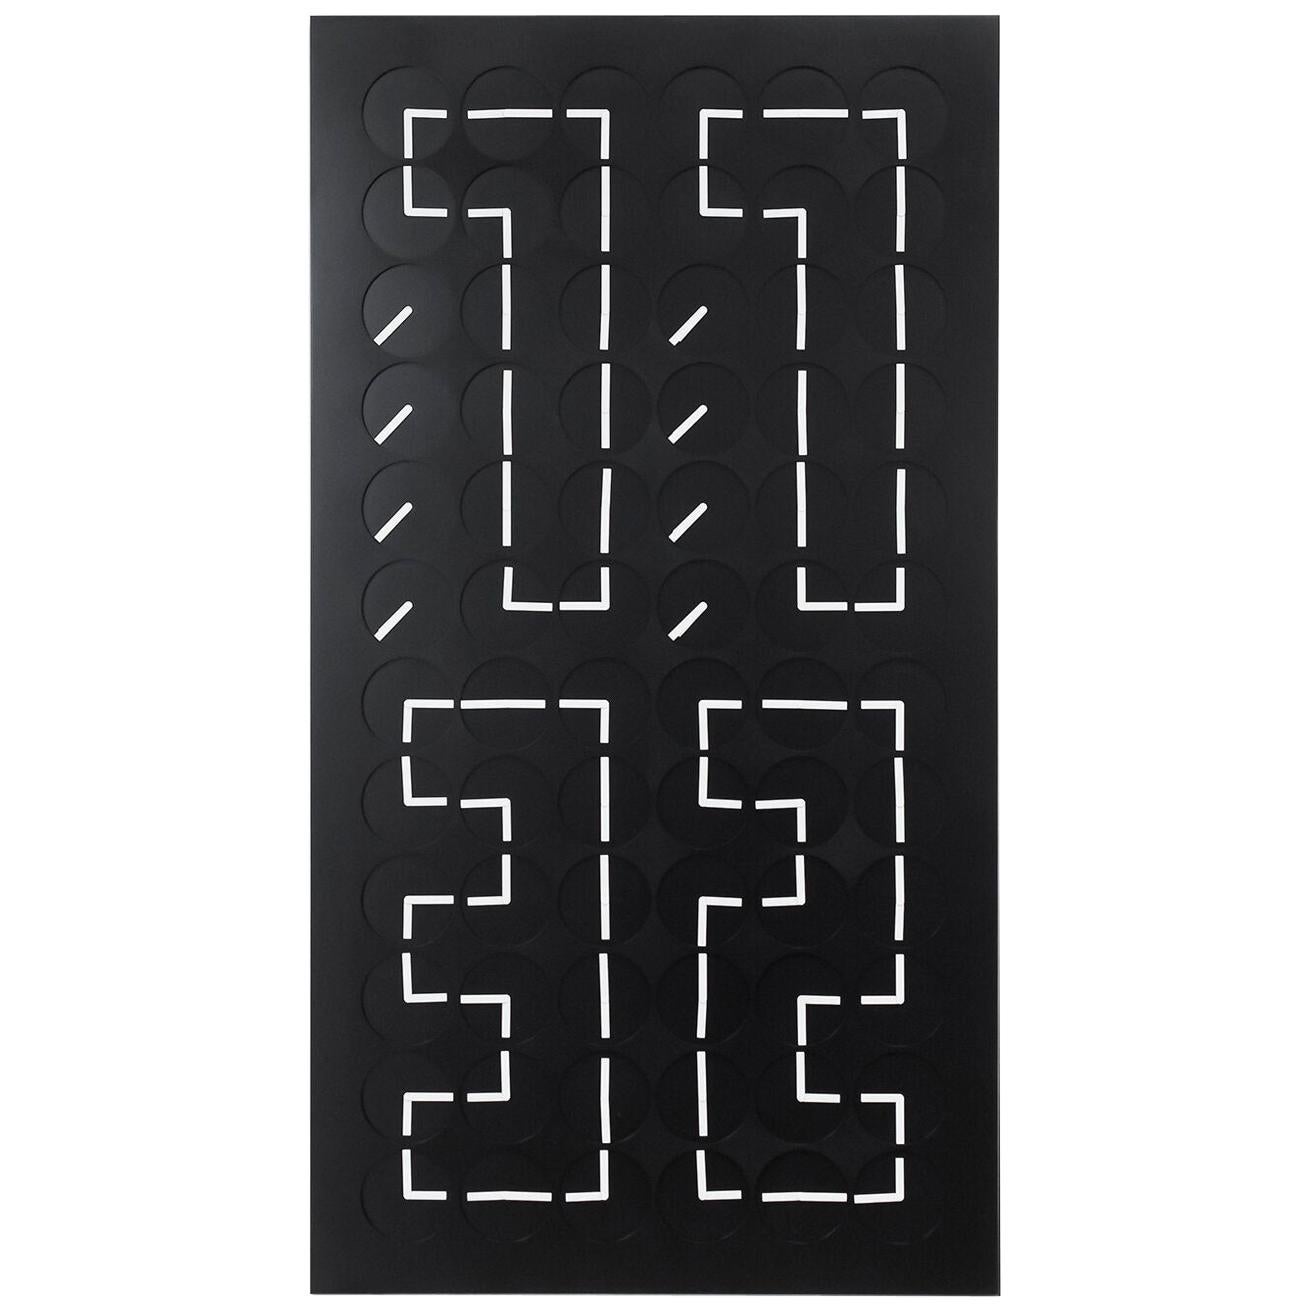 A Million Times 72V Black Wall Clock Wall Sculpture by Humans Since 1982